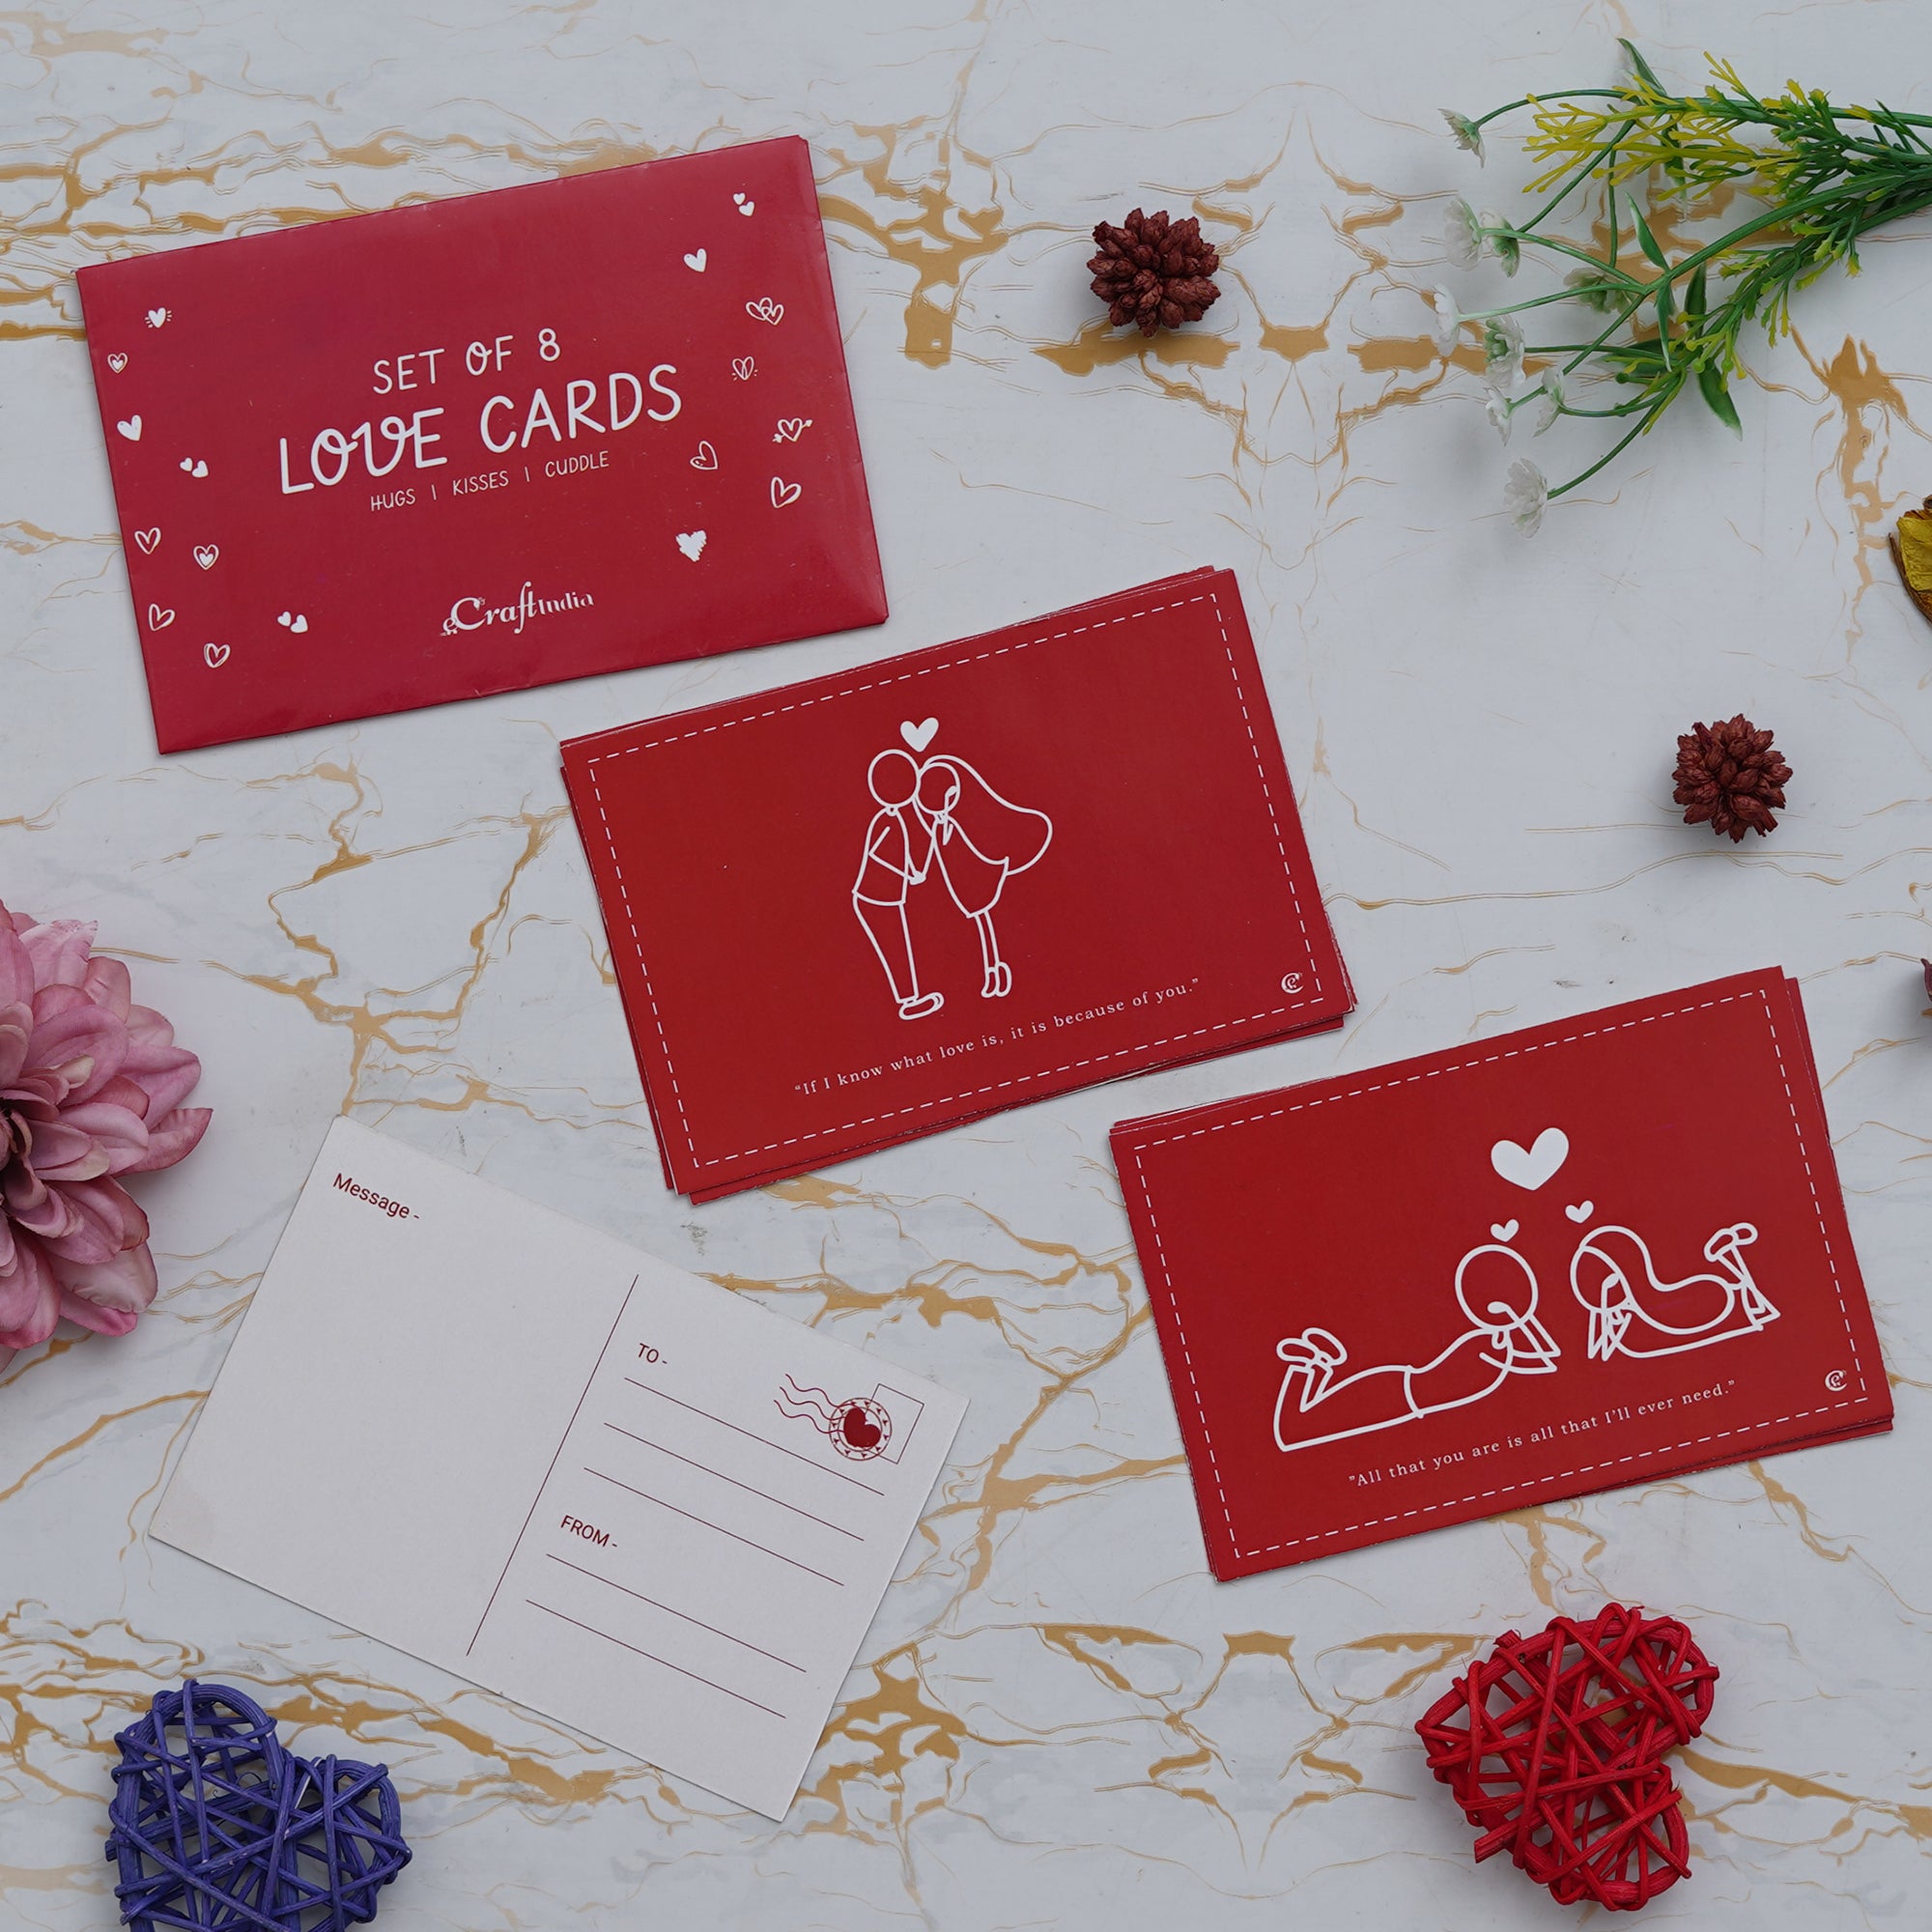 Valentine Combo of Pack of 8 Love Gift Cards, Red Gift Box with Teddy & Roses, Red and White Heart Hugging Each Other Gift Set 1